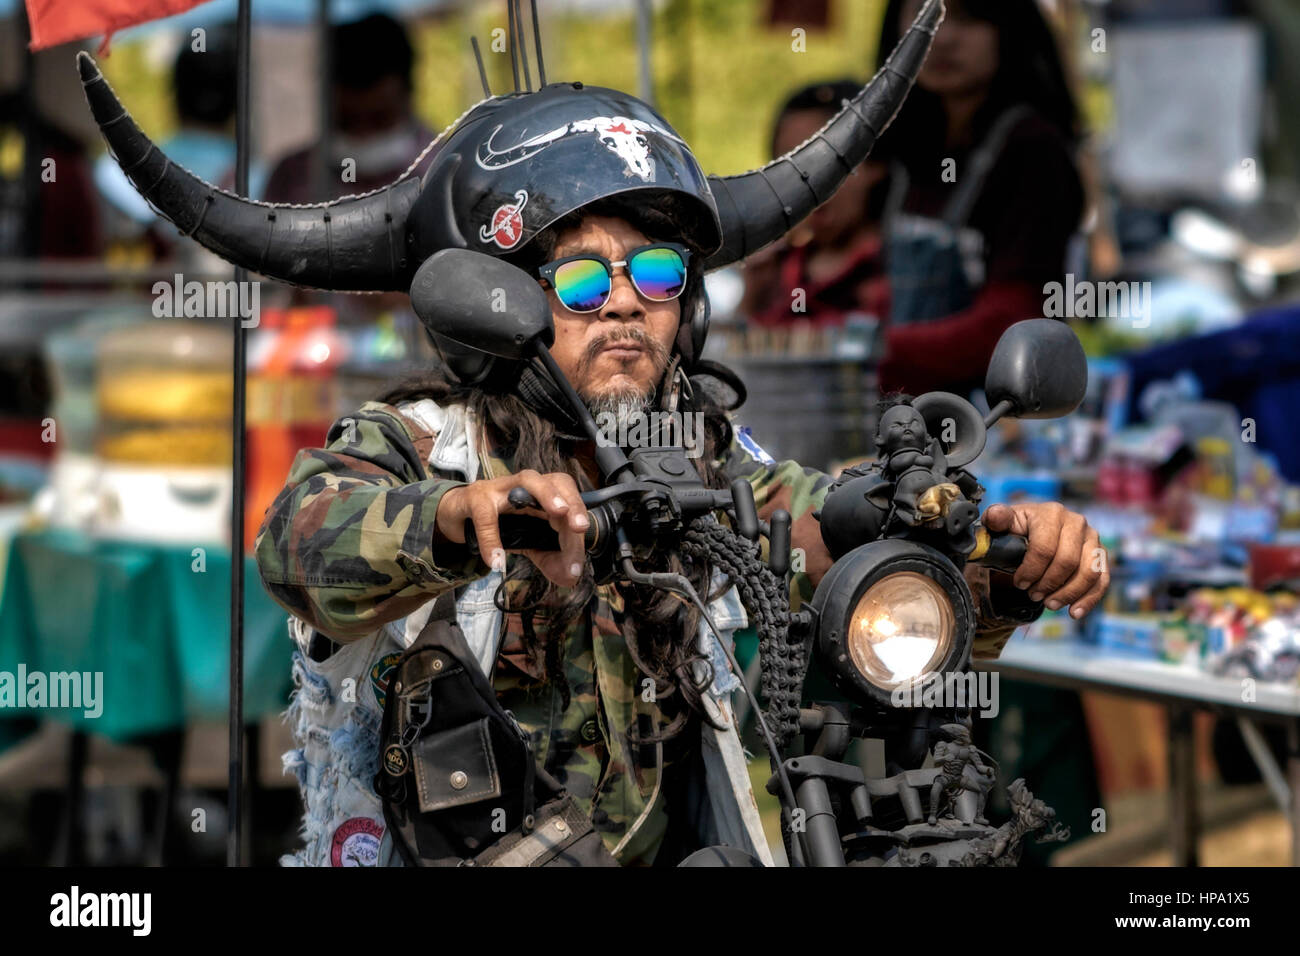 Biker at a motorcycle festival sporting a very unusual and customised safety helmet. Thailand people, Southeast Asia Stock Photo